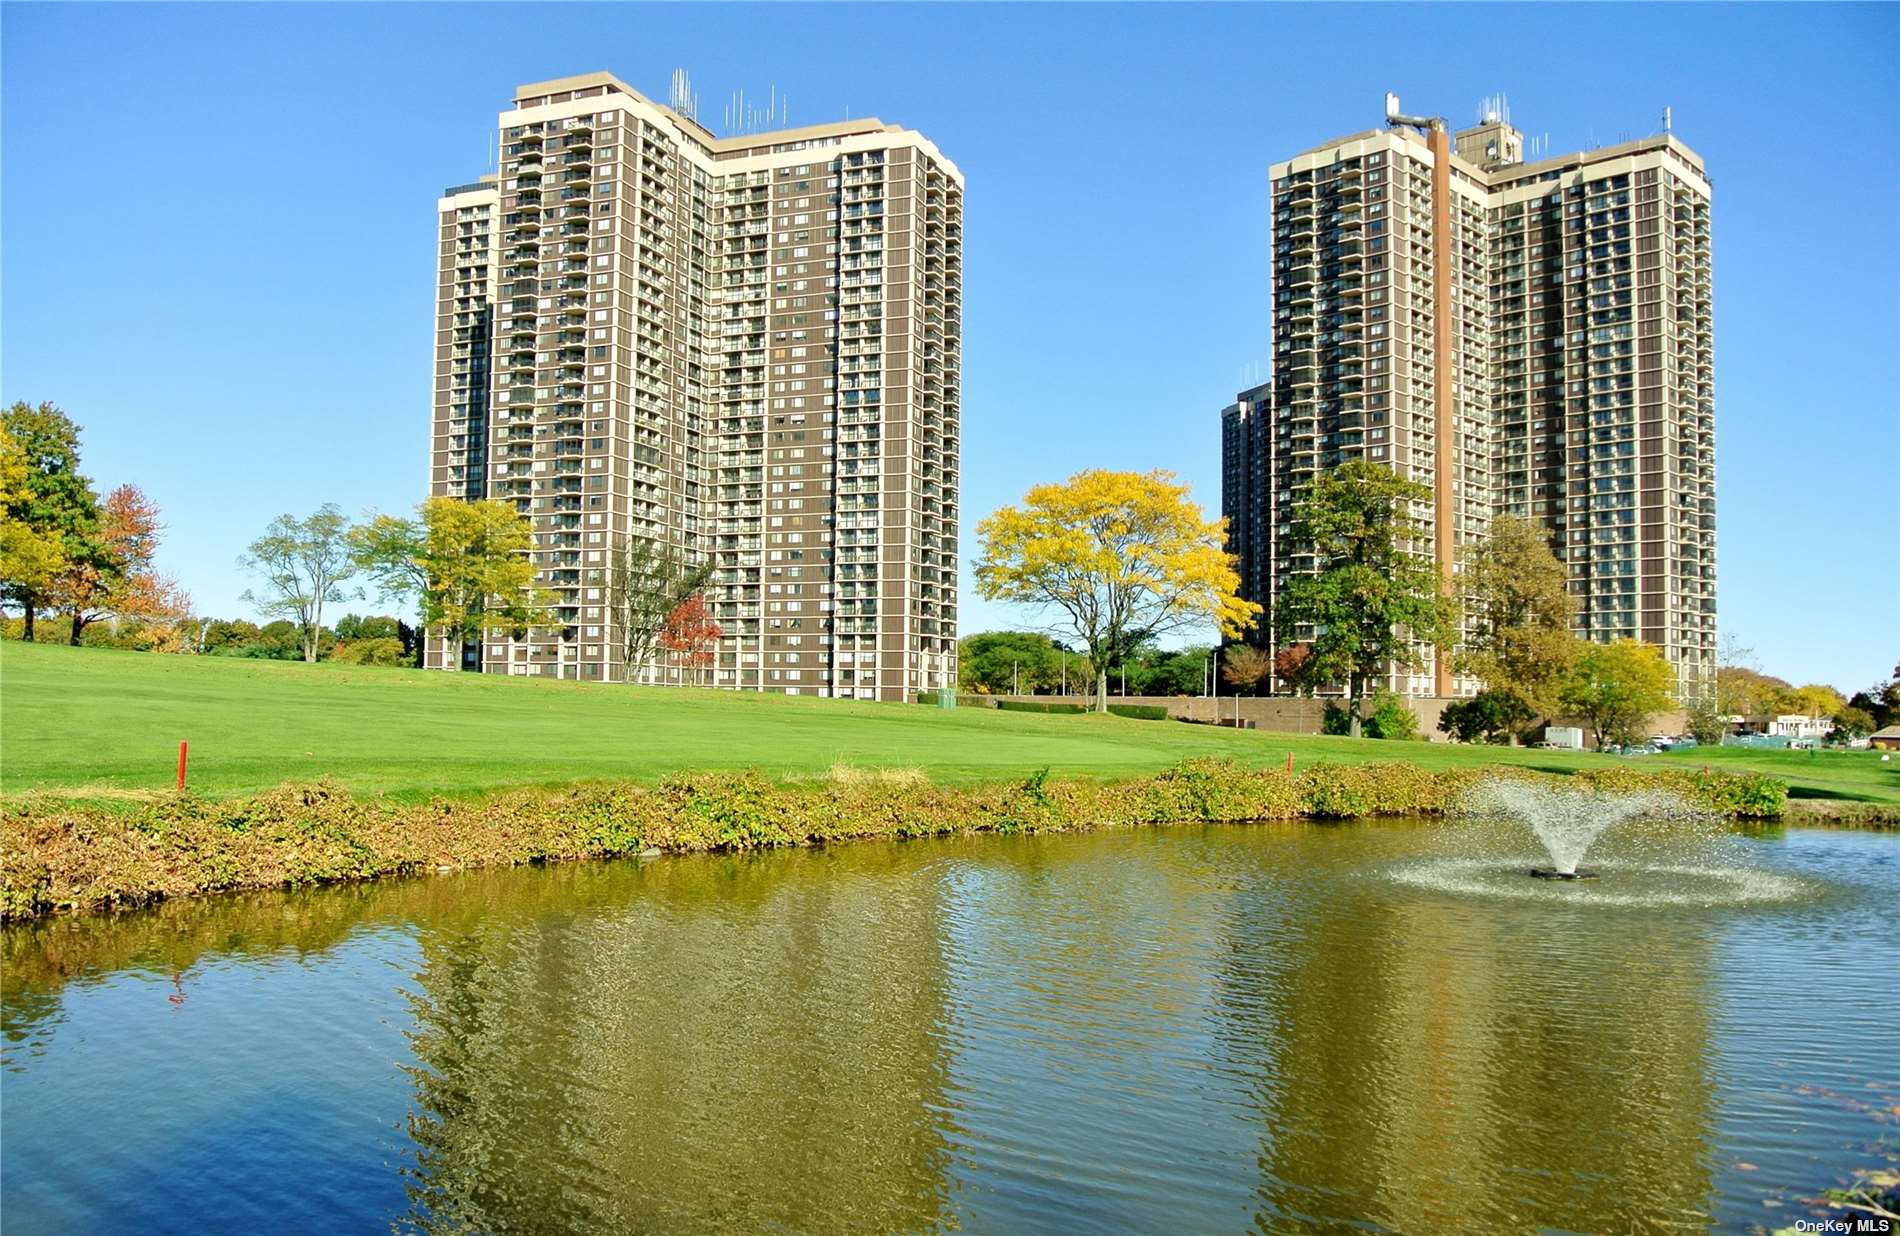 a view of lake with tall building